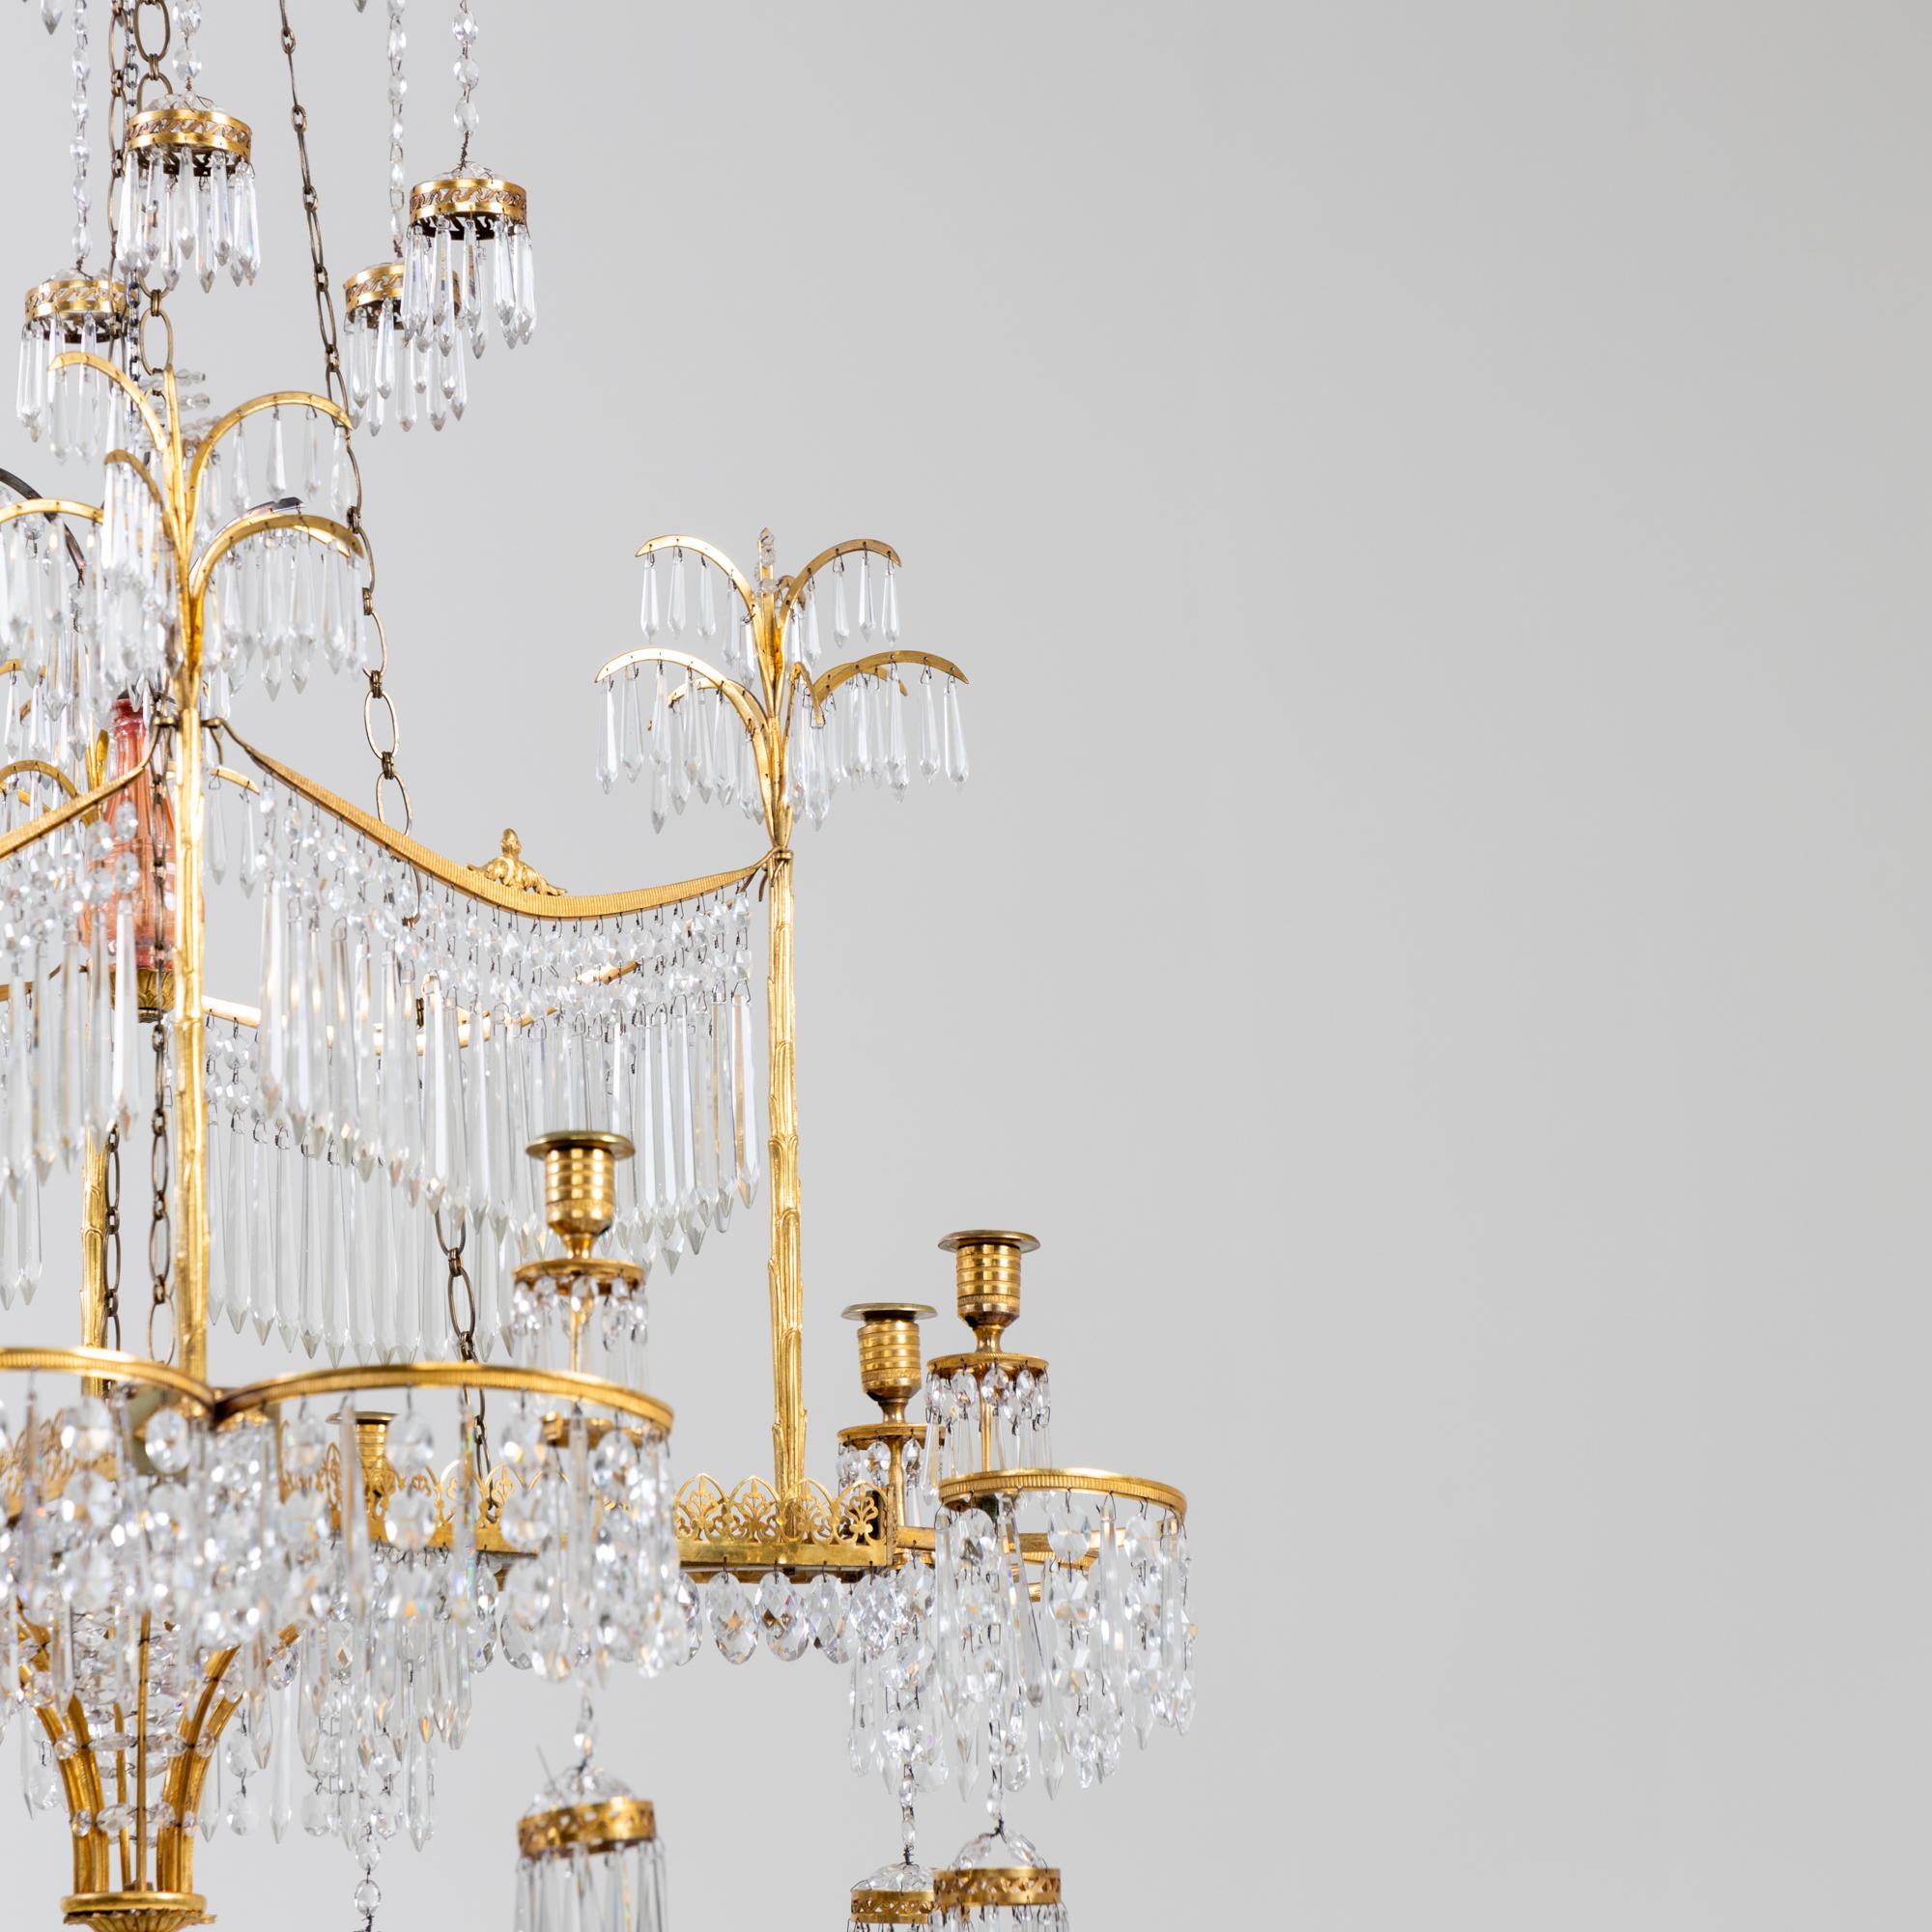 Chandelier with Palm Trees, Werner & Mieth, Berlin c. 1800-1810 For Sale 1